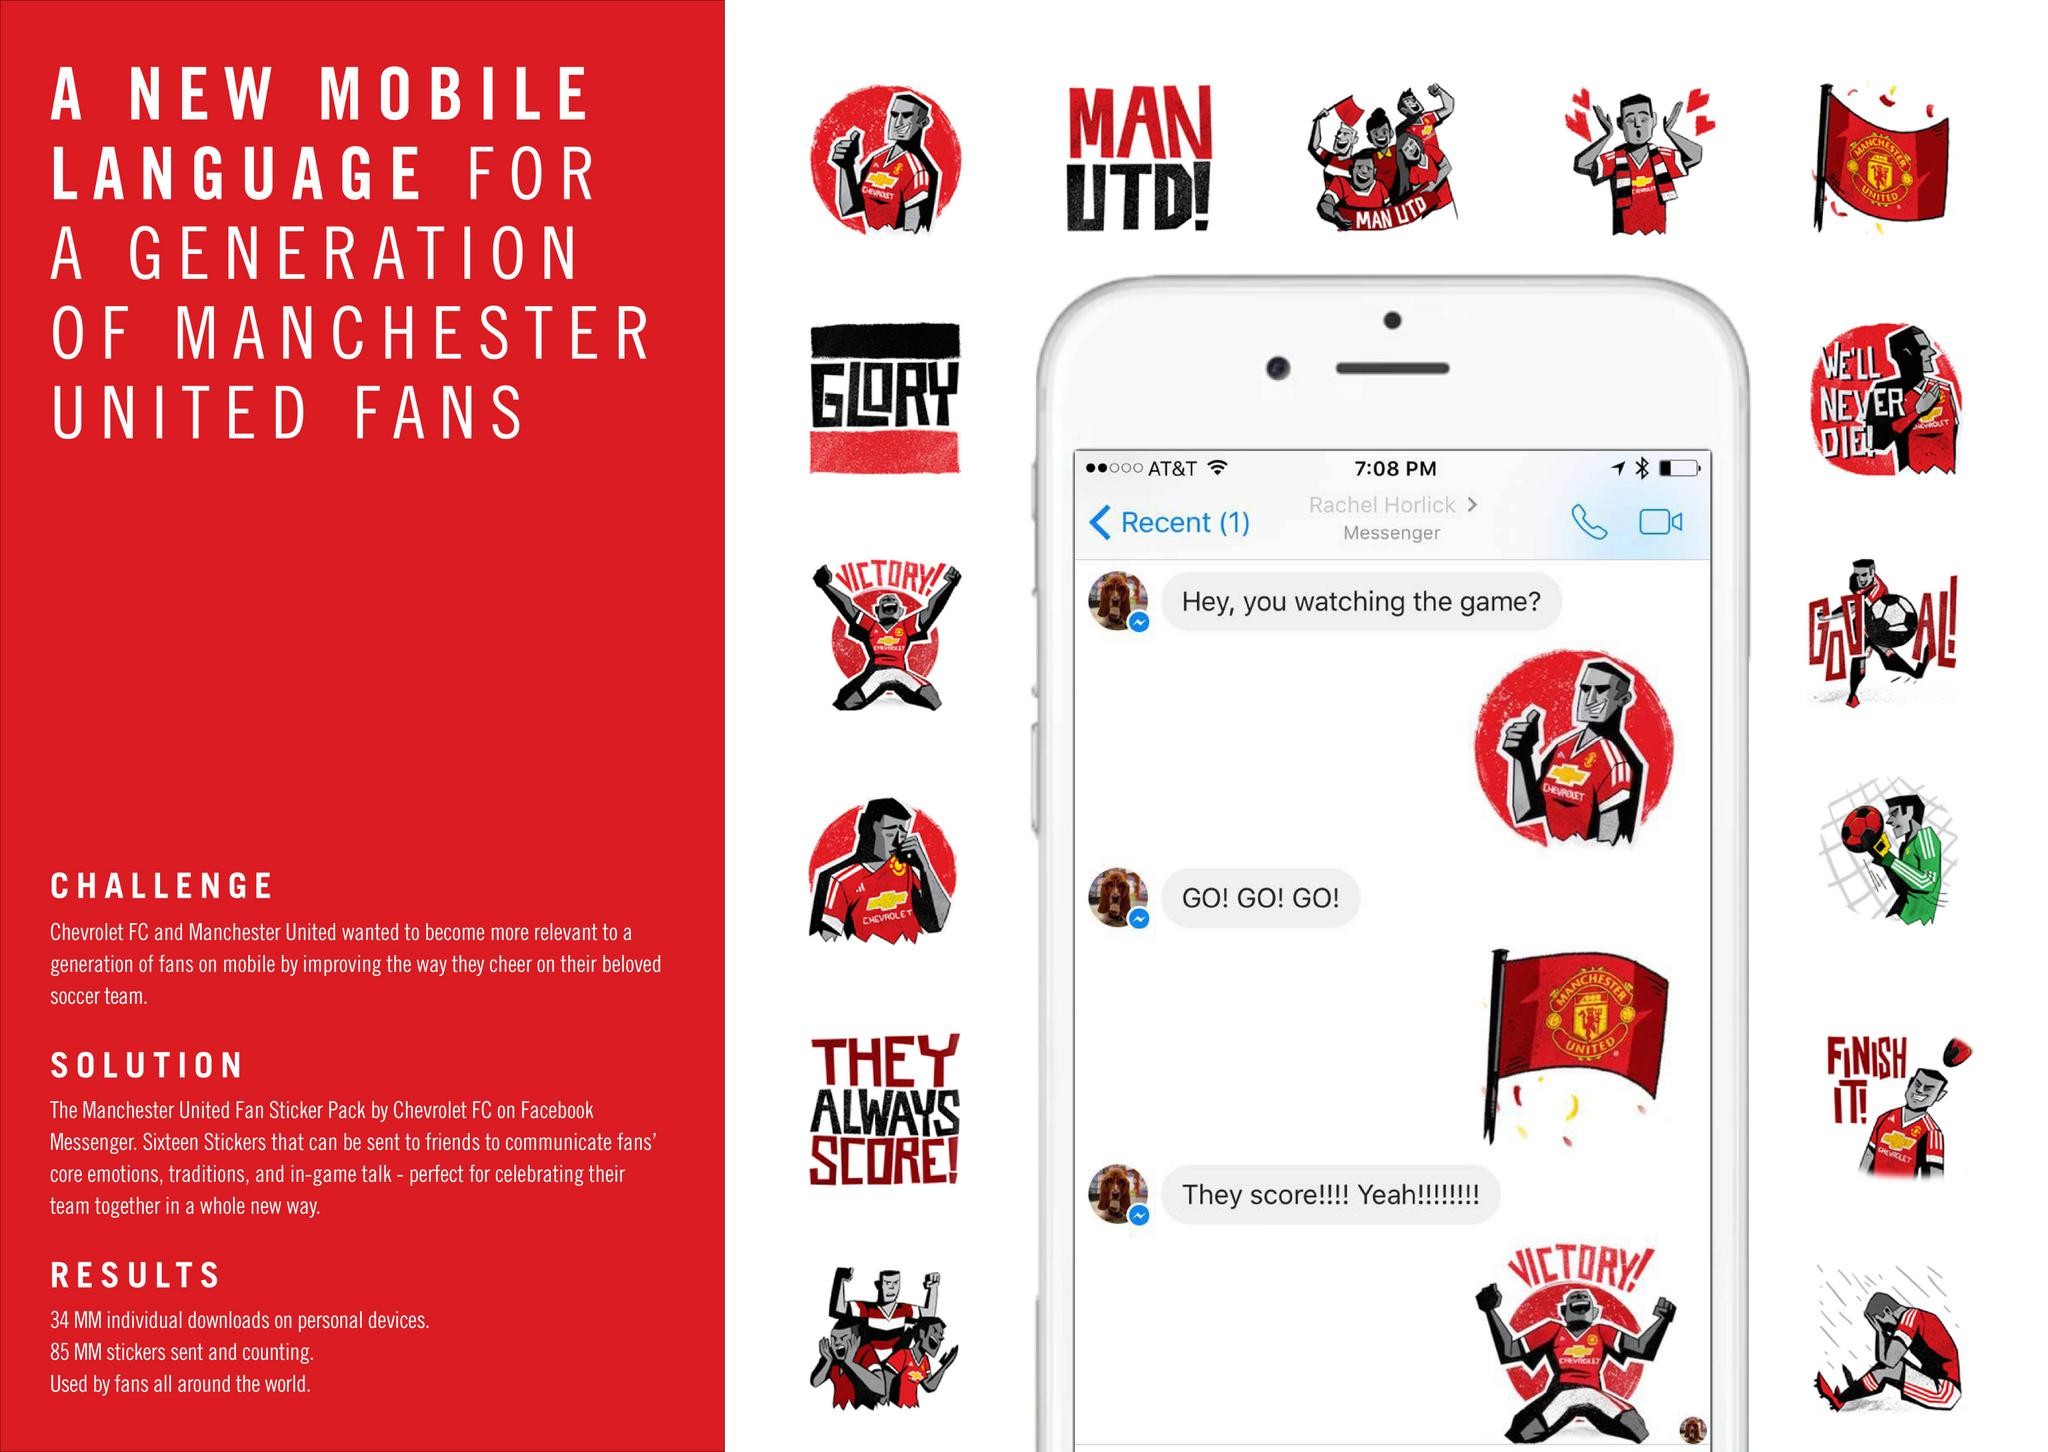 Manchester United Fan Sticker Pack by Chevrolet FC